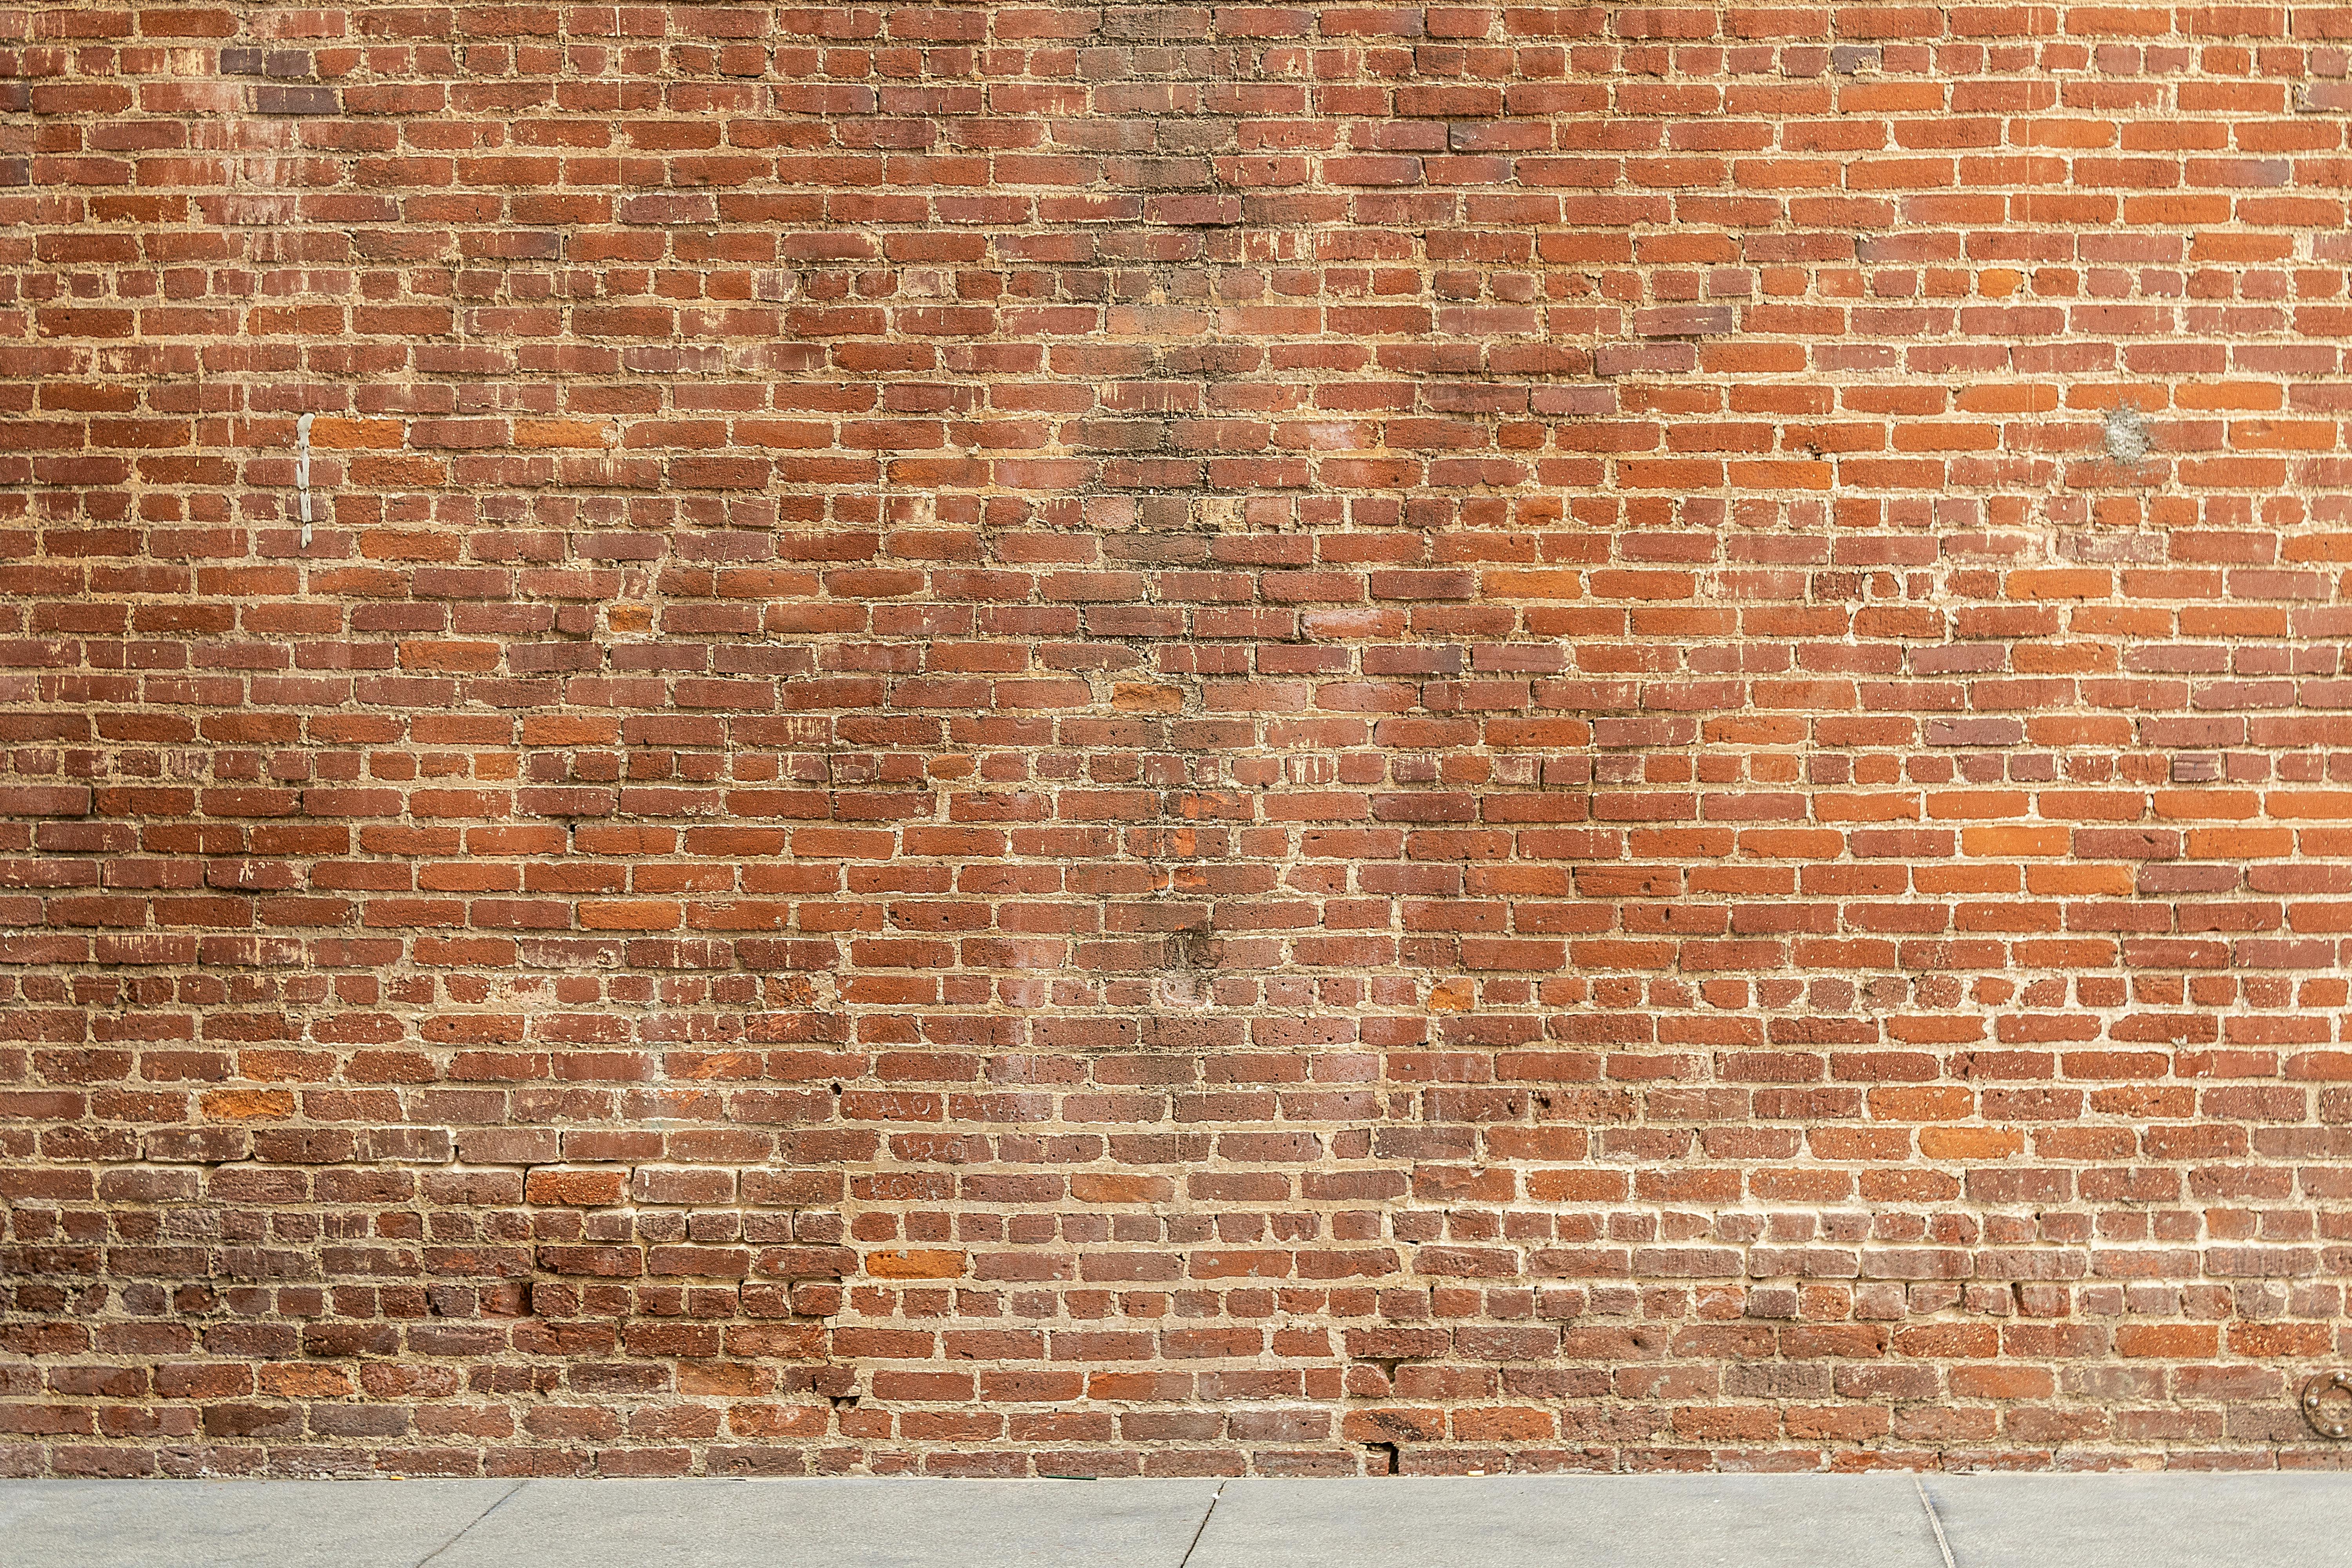 7400 Brick Wall Background Stock Videos and RoyaltyFree Footage  iStock   Single brick Brick wall Brick texture